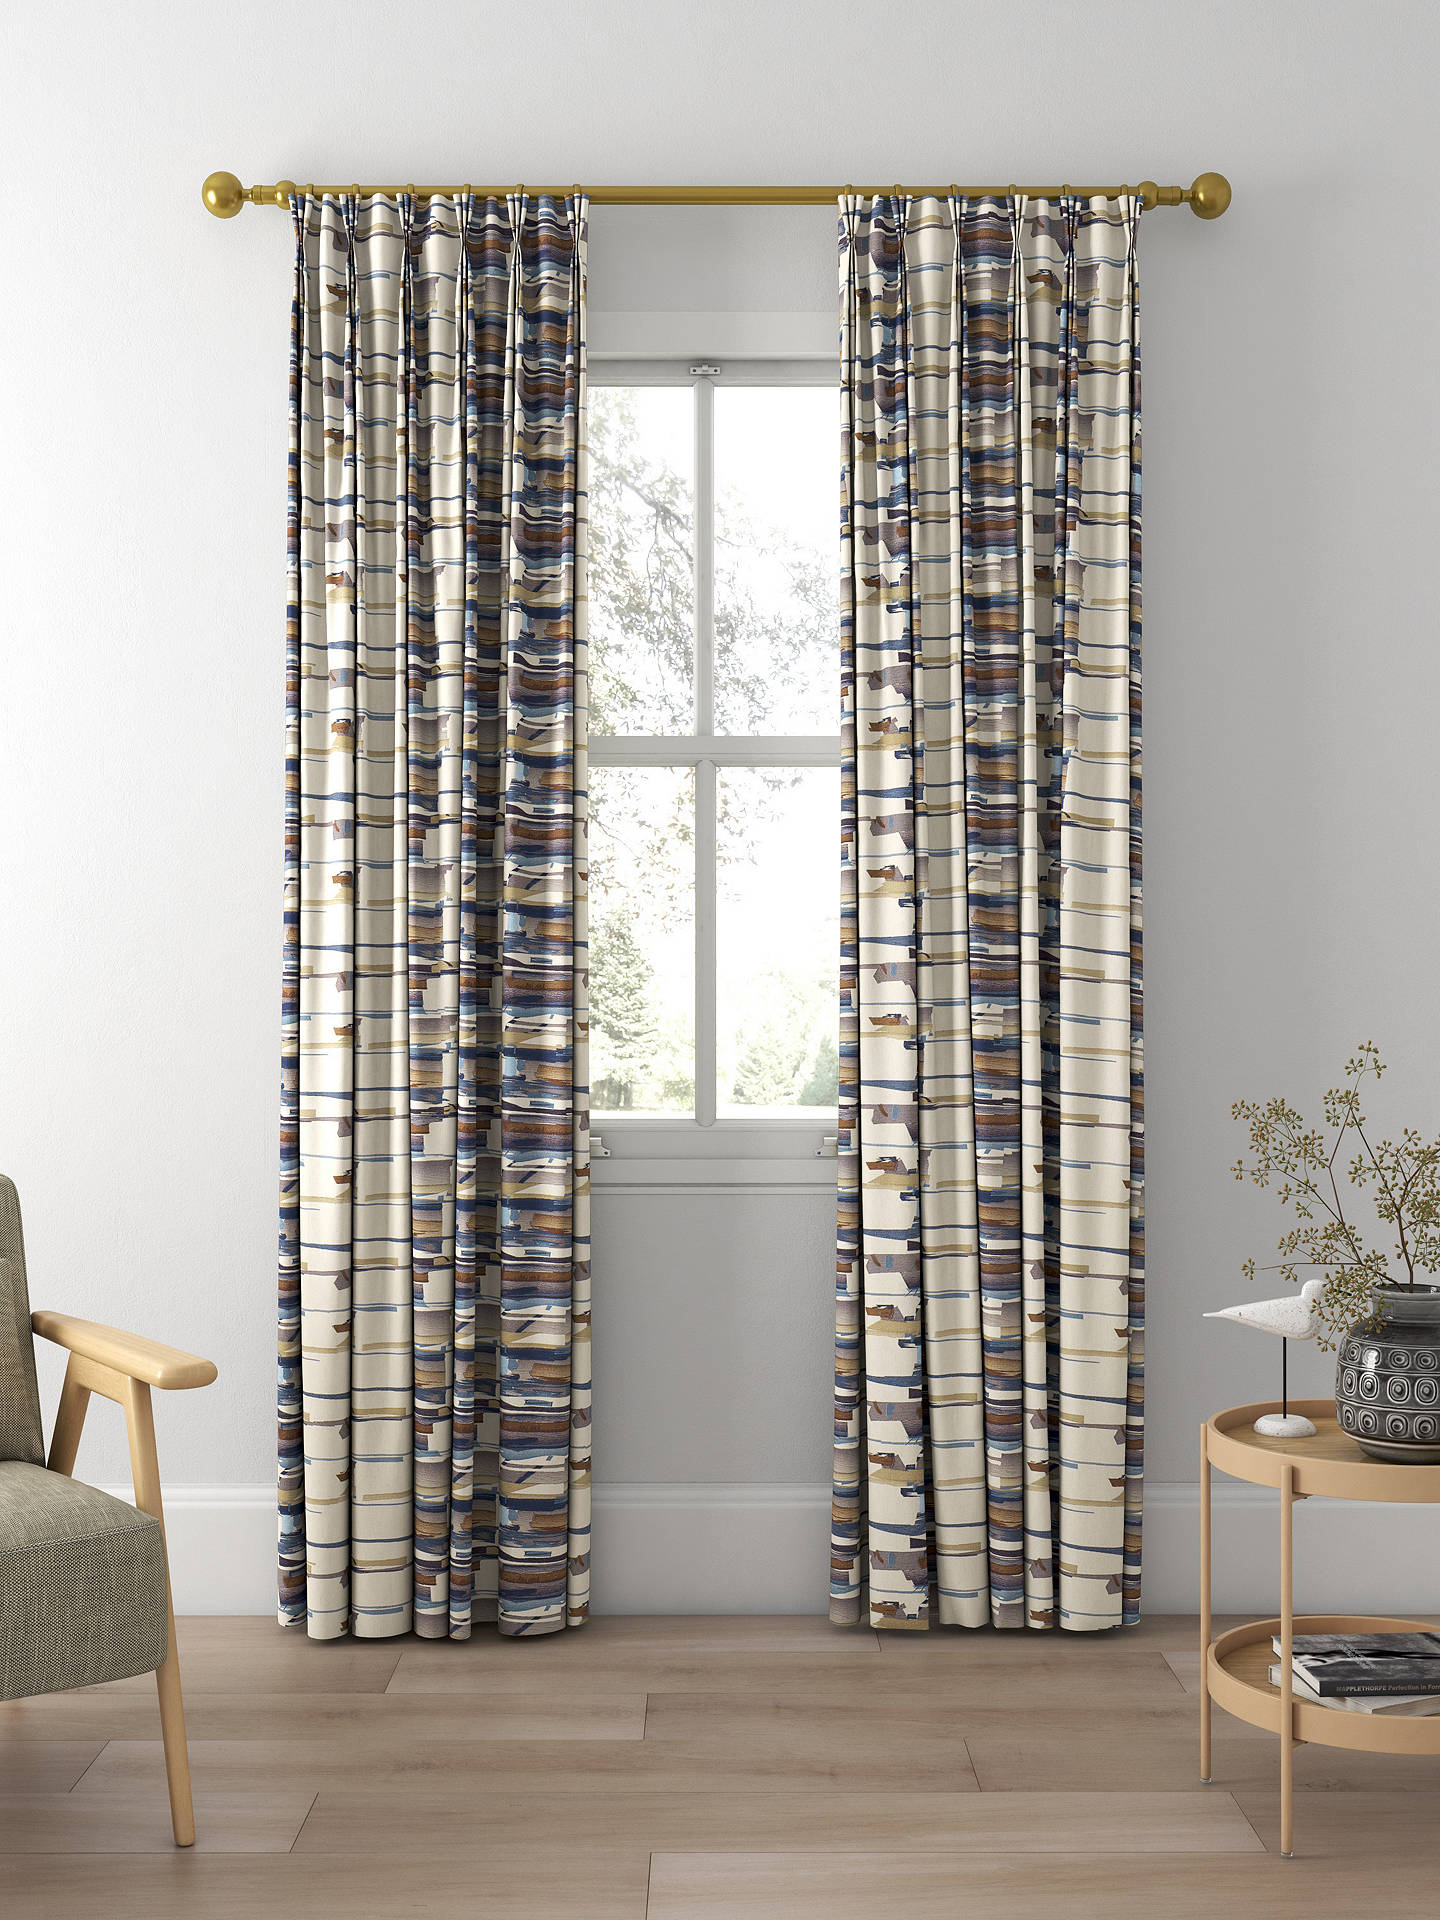 Harlequin Momentum 4 Made to Measure Curtains, Old Navy/Denim/Tan